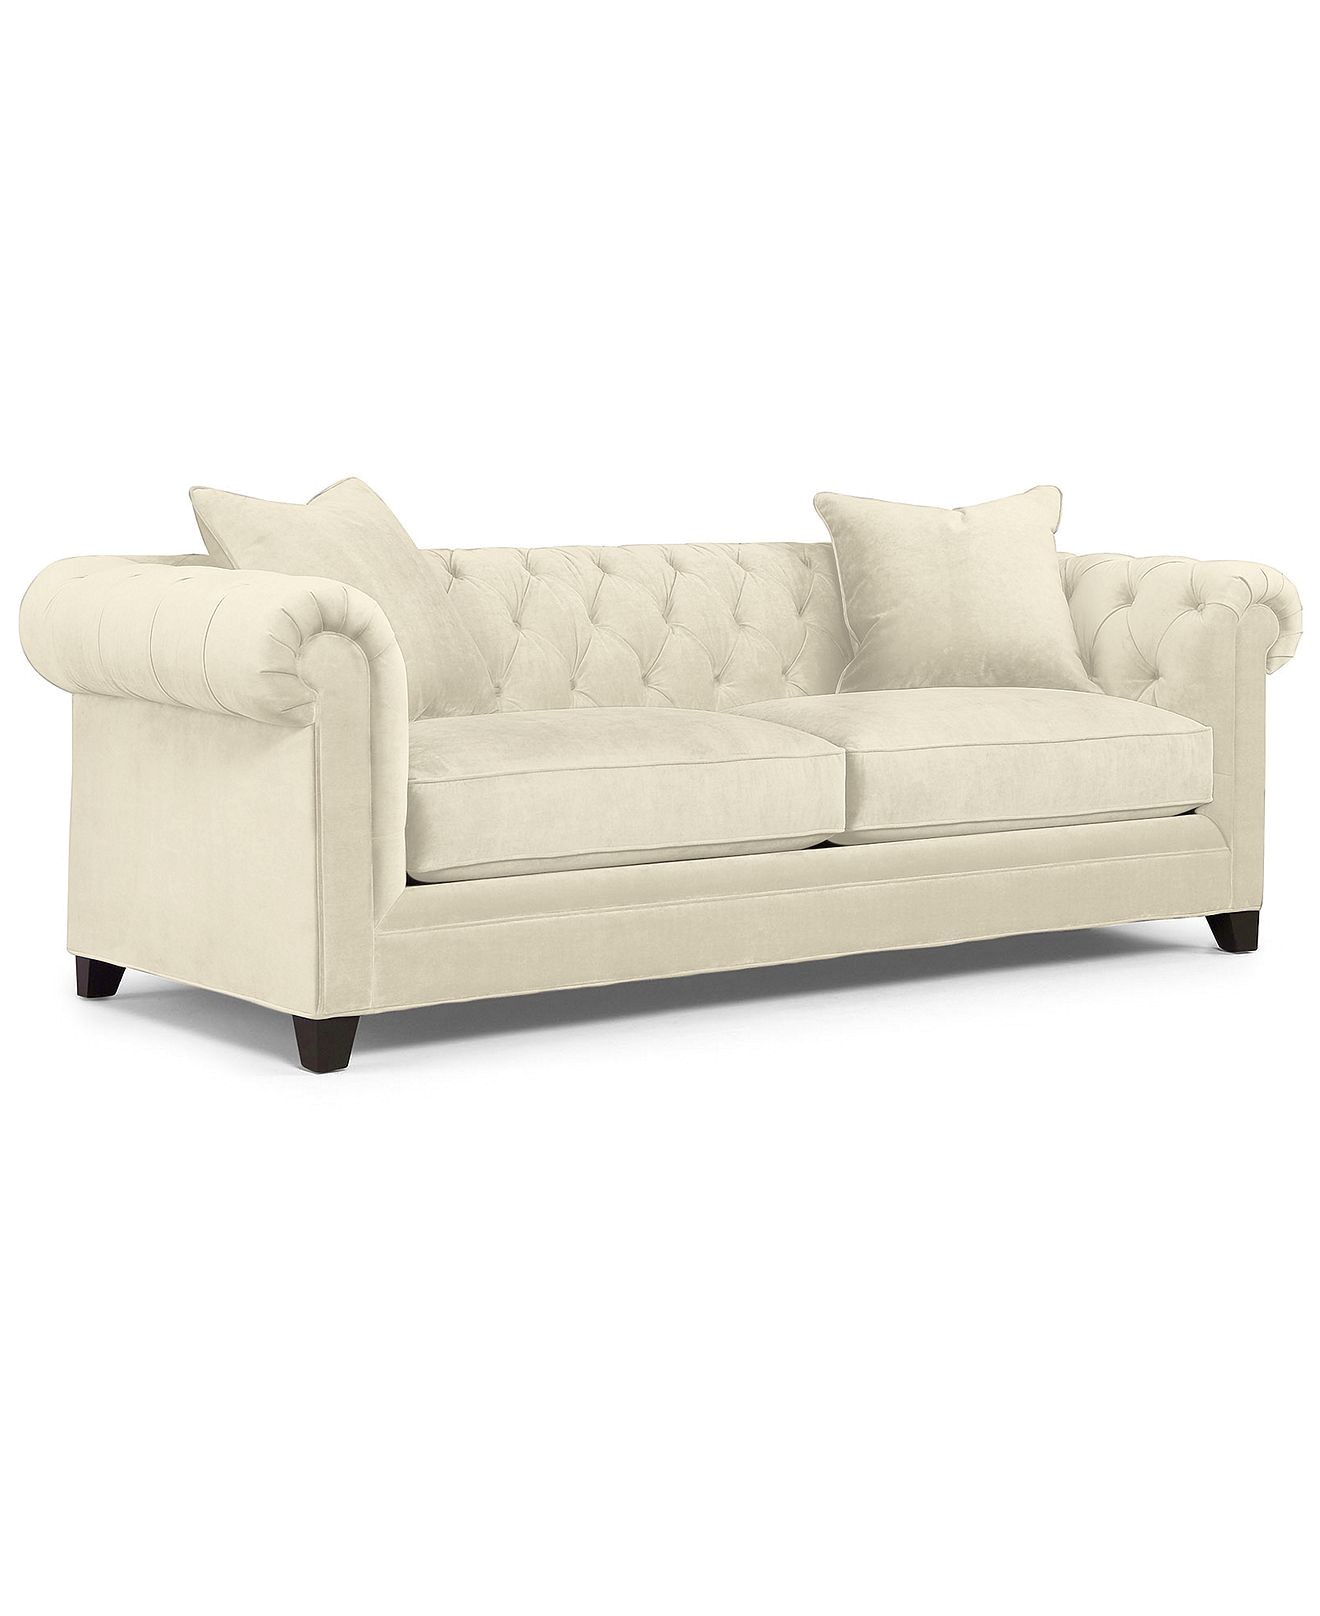 martha stewart saybridge sofa in cocoa vintage honey or toast this is my dream couch 999 at macy s